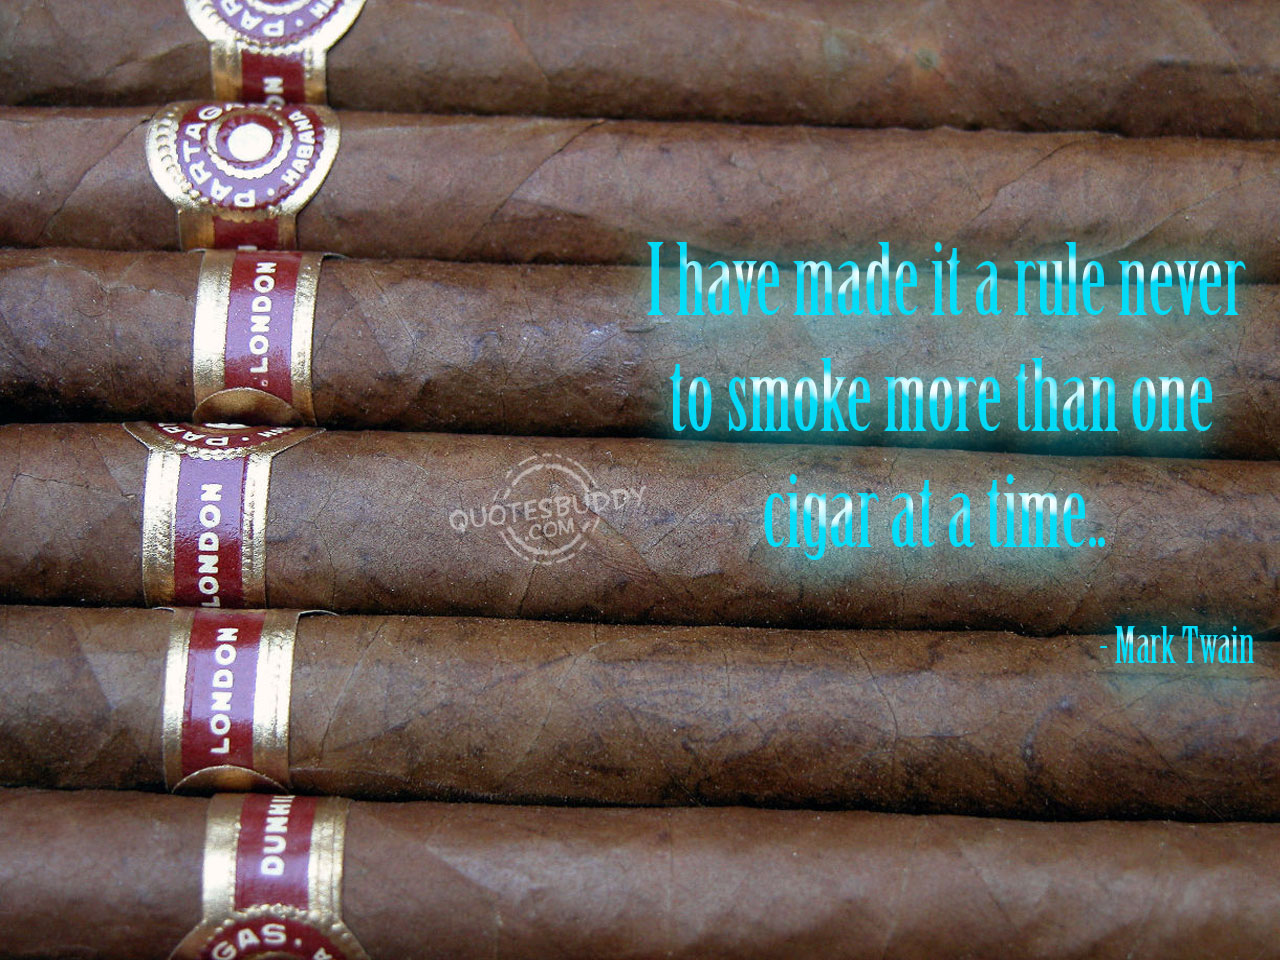 I have made it a rule never to smoke more than one cigar at a time. Mark Twain